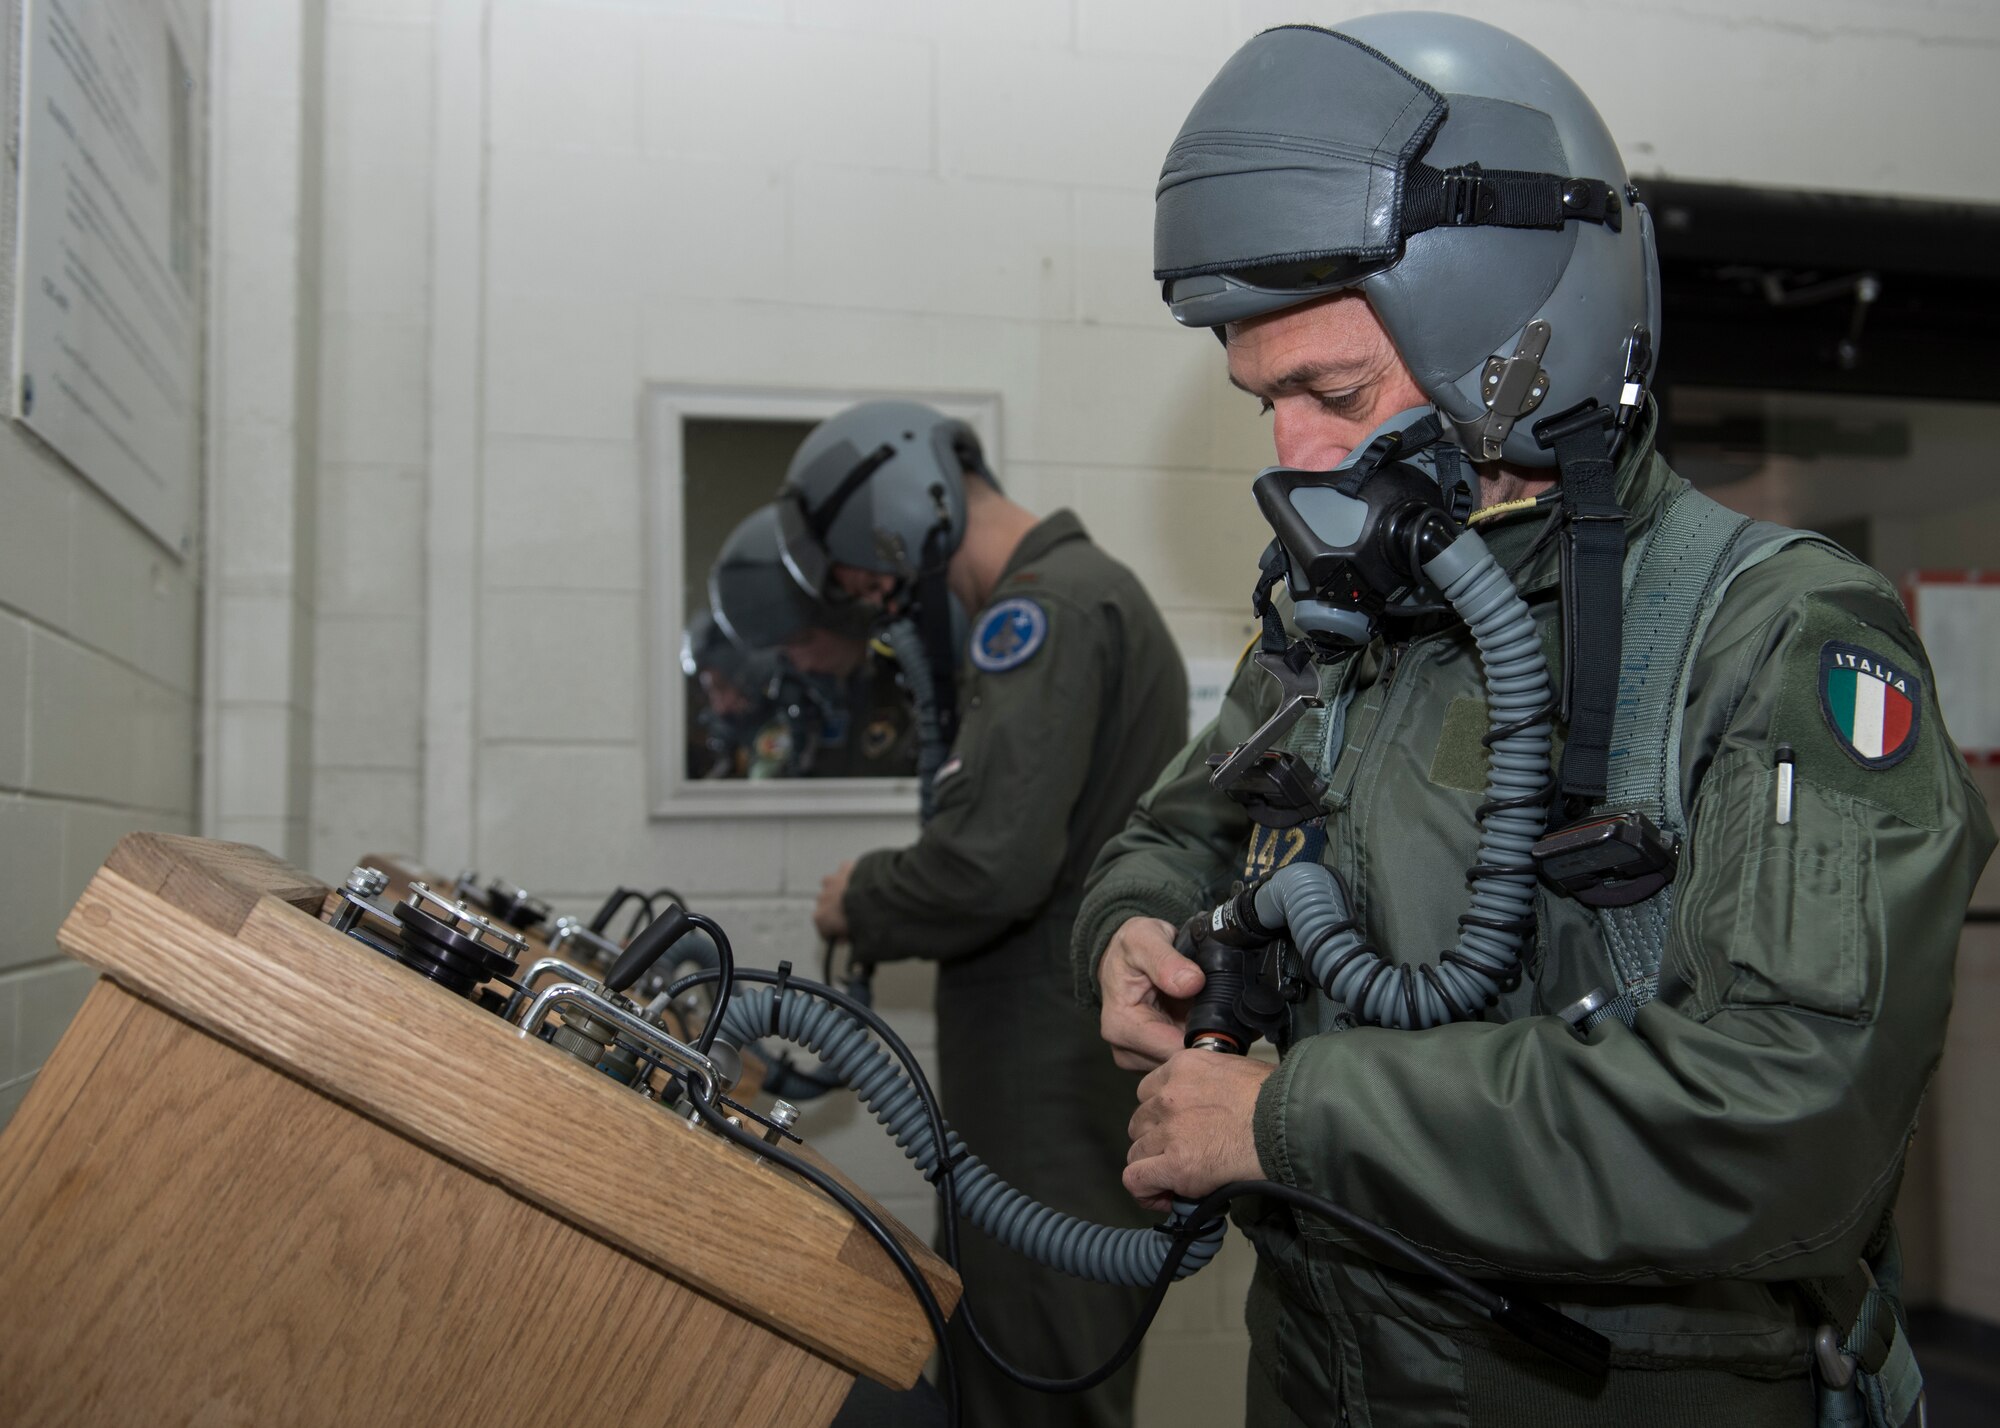 Euro-NATO Joint Jet Pilot Training Program student pilots check their equipment before flying at Sheppard Air Force Base, Texas, Dec. 10, 2019. The pilots get their gear fitted first by the Aircrew Flight Equipment Airmen, but after the initial fitting, they will mostly be gearing up and preparing their equipment themselves. (U.S. Air Force photo by Senior Airman Pedro Tenorio)